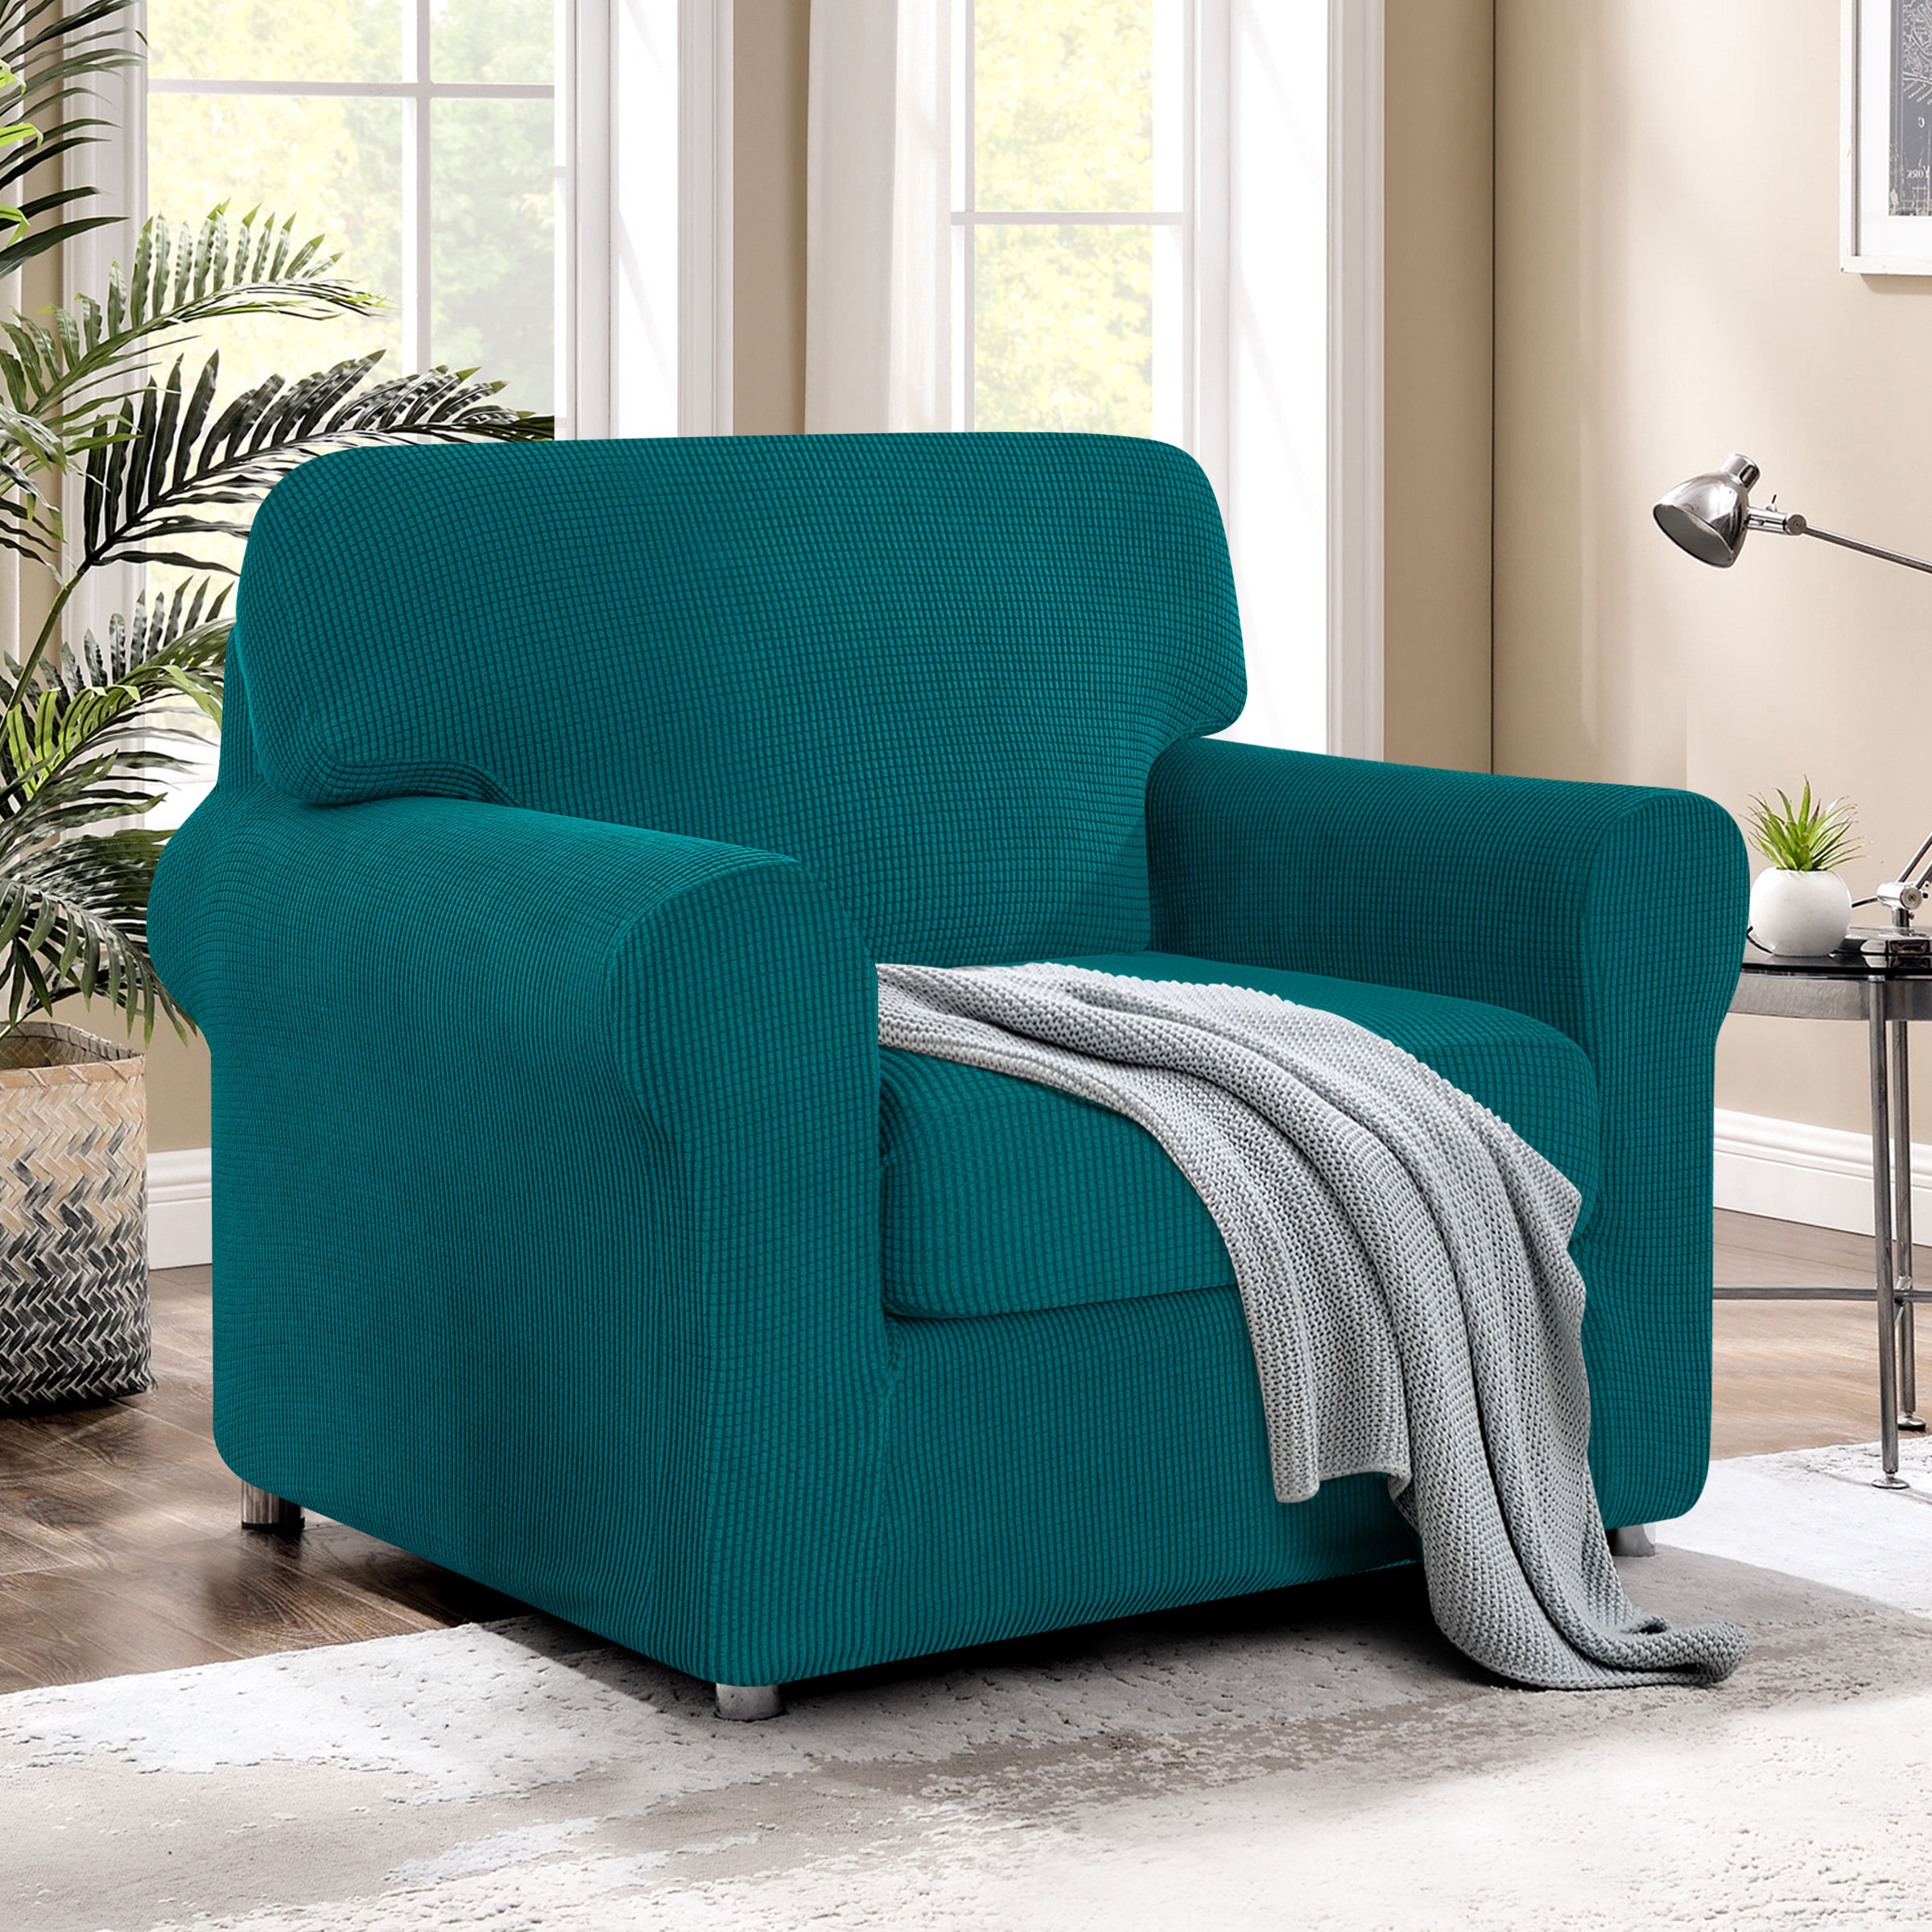 Smooth Velvet Booster Cushion for Box Sofa / Chair filled With